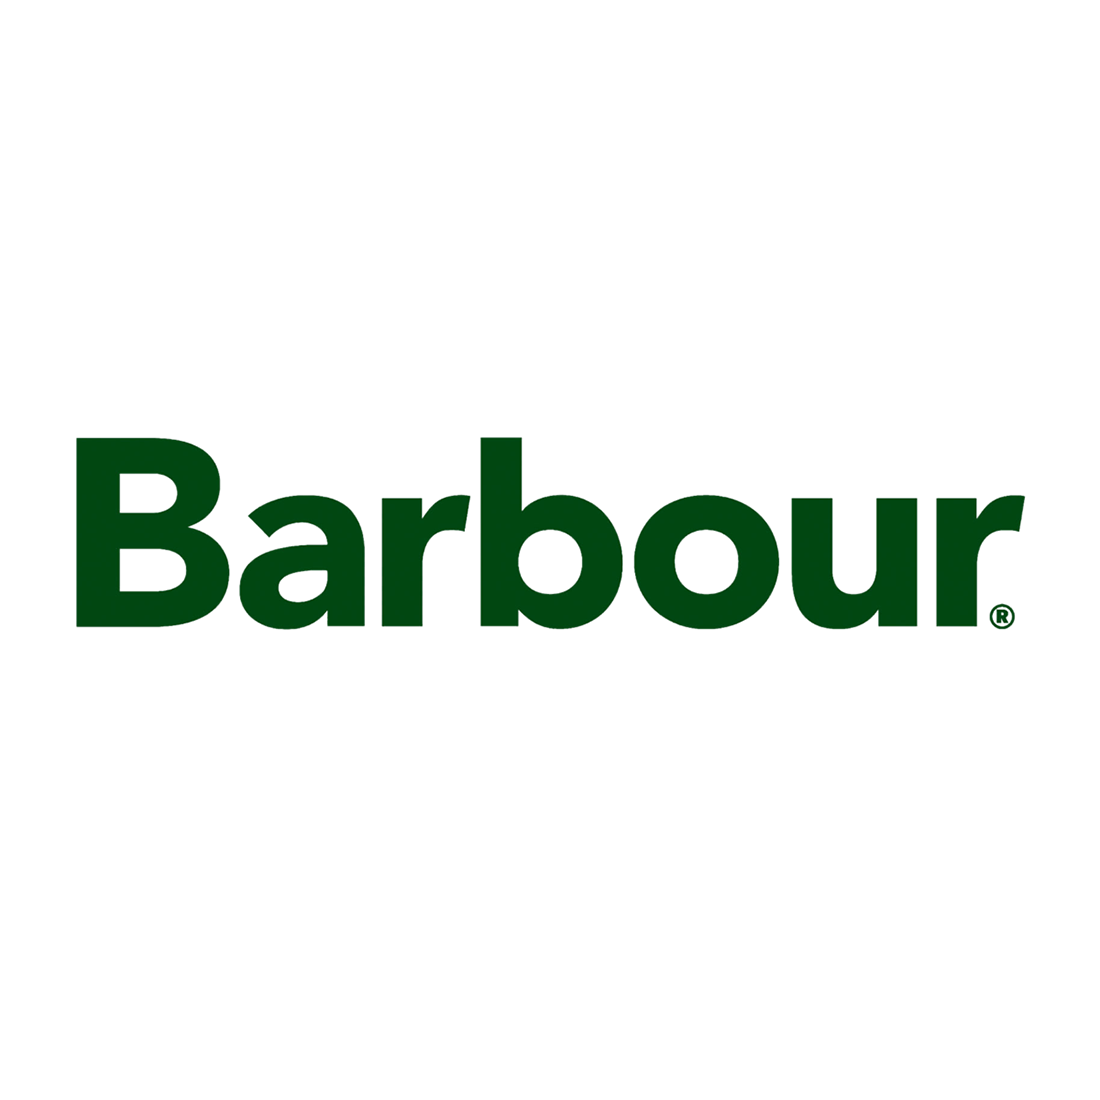 Barbour Logo - Barbour - County Clothes